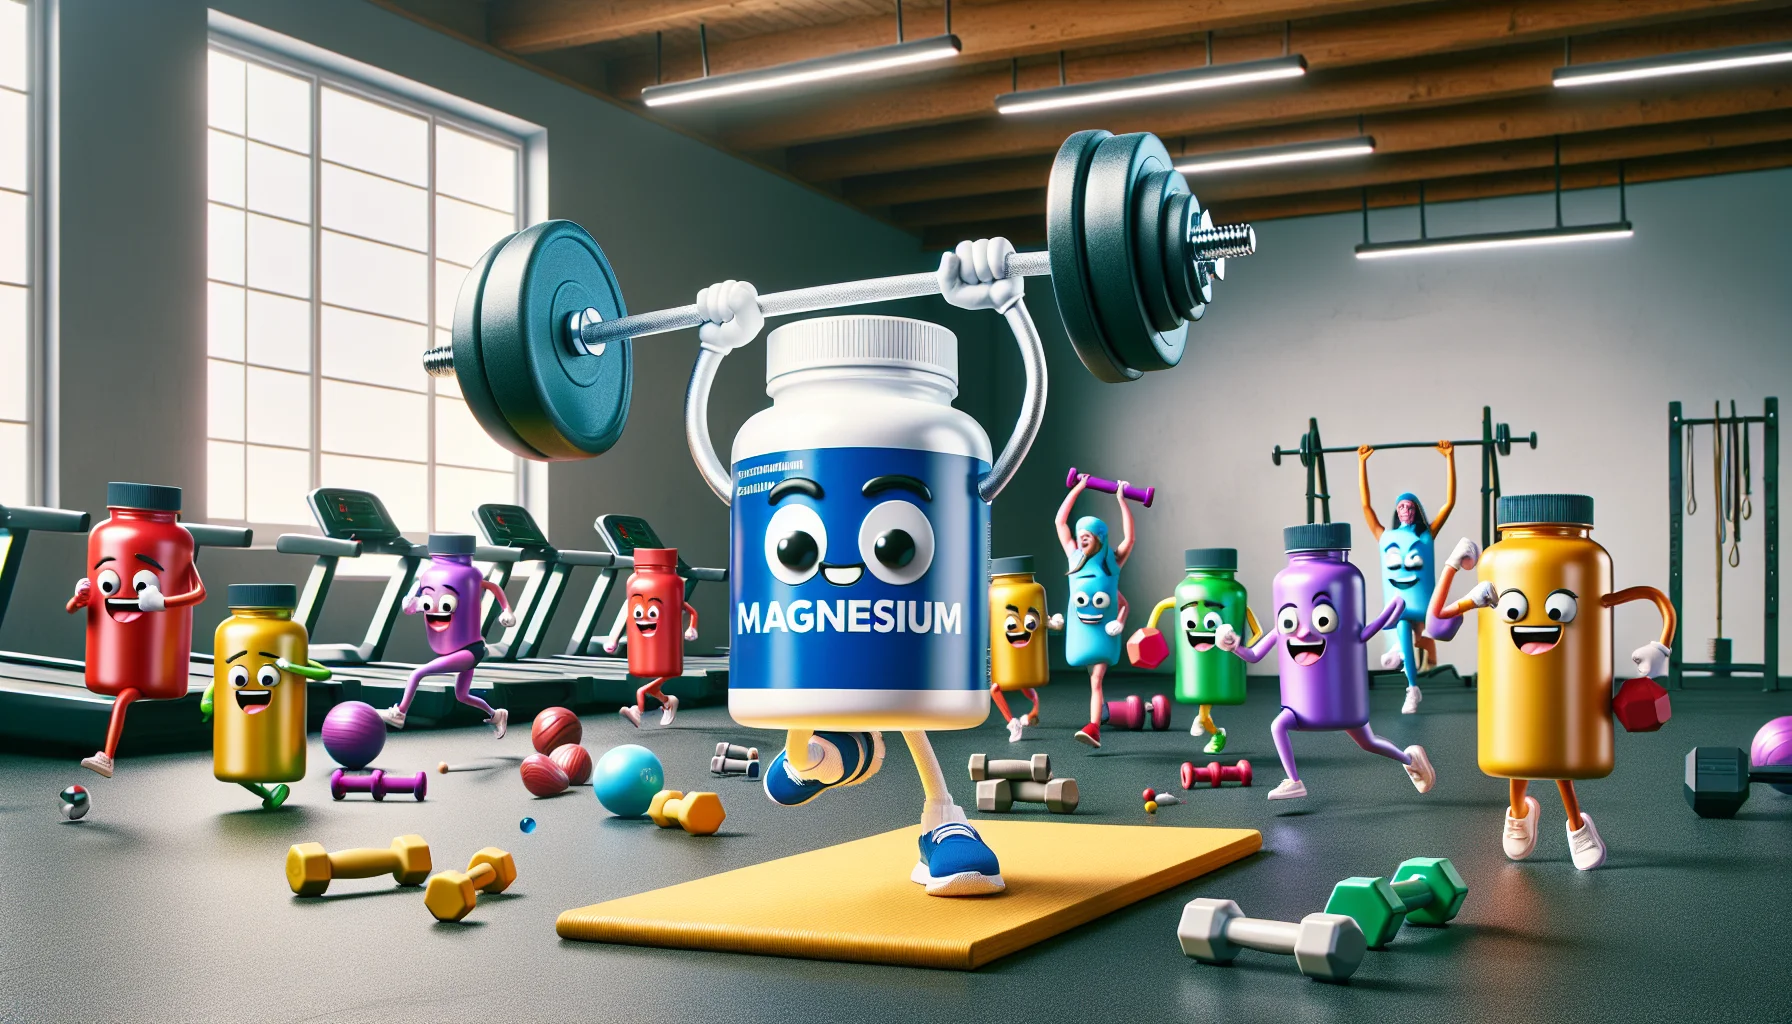 Create an image showcasing a vibrant magnesium supplement bottle humorously lifting weights among other athletic equipment. The background could be a gym setting filled with other supplements ambitiously engaging in various sports activities - running on treadmills, doing yoga, jumping ropes. This playful scenario emphasizes that supplements could give you an extra 'lift' in your sports routines. Include some cheerful color palette to highlight the fun and vitality in maintaining health through supplements intake.